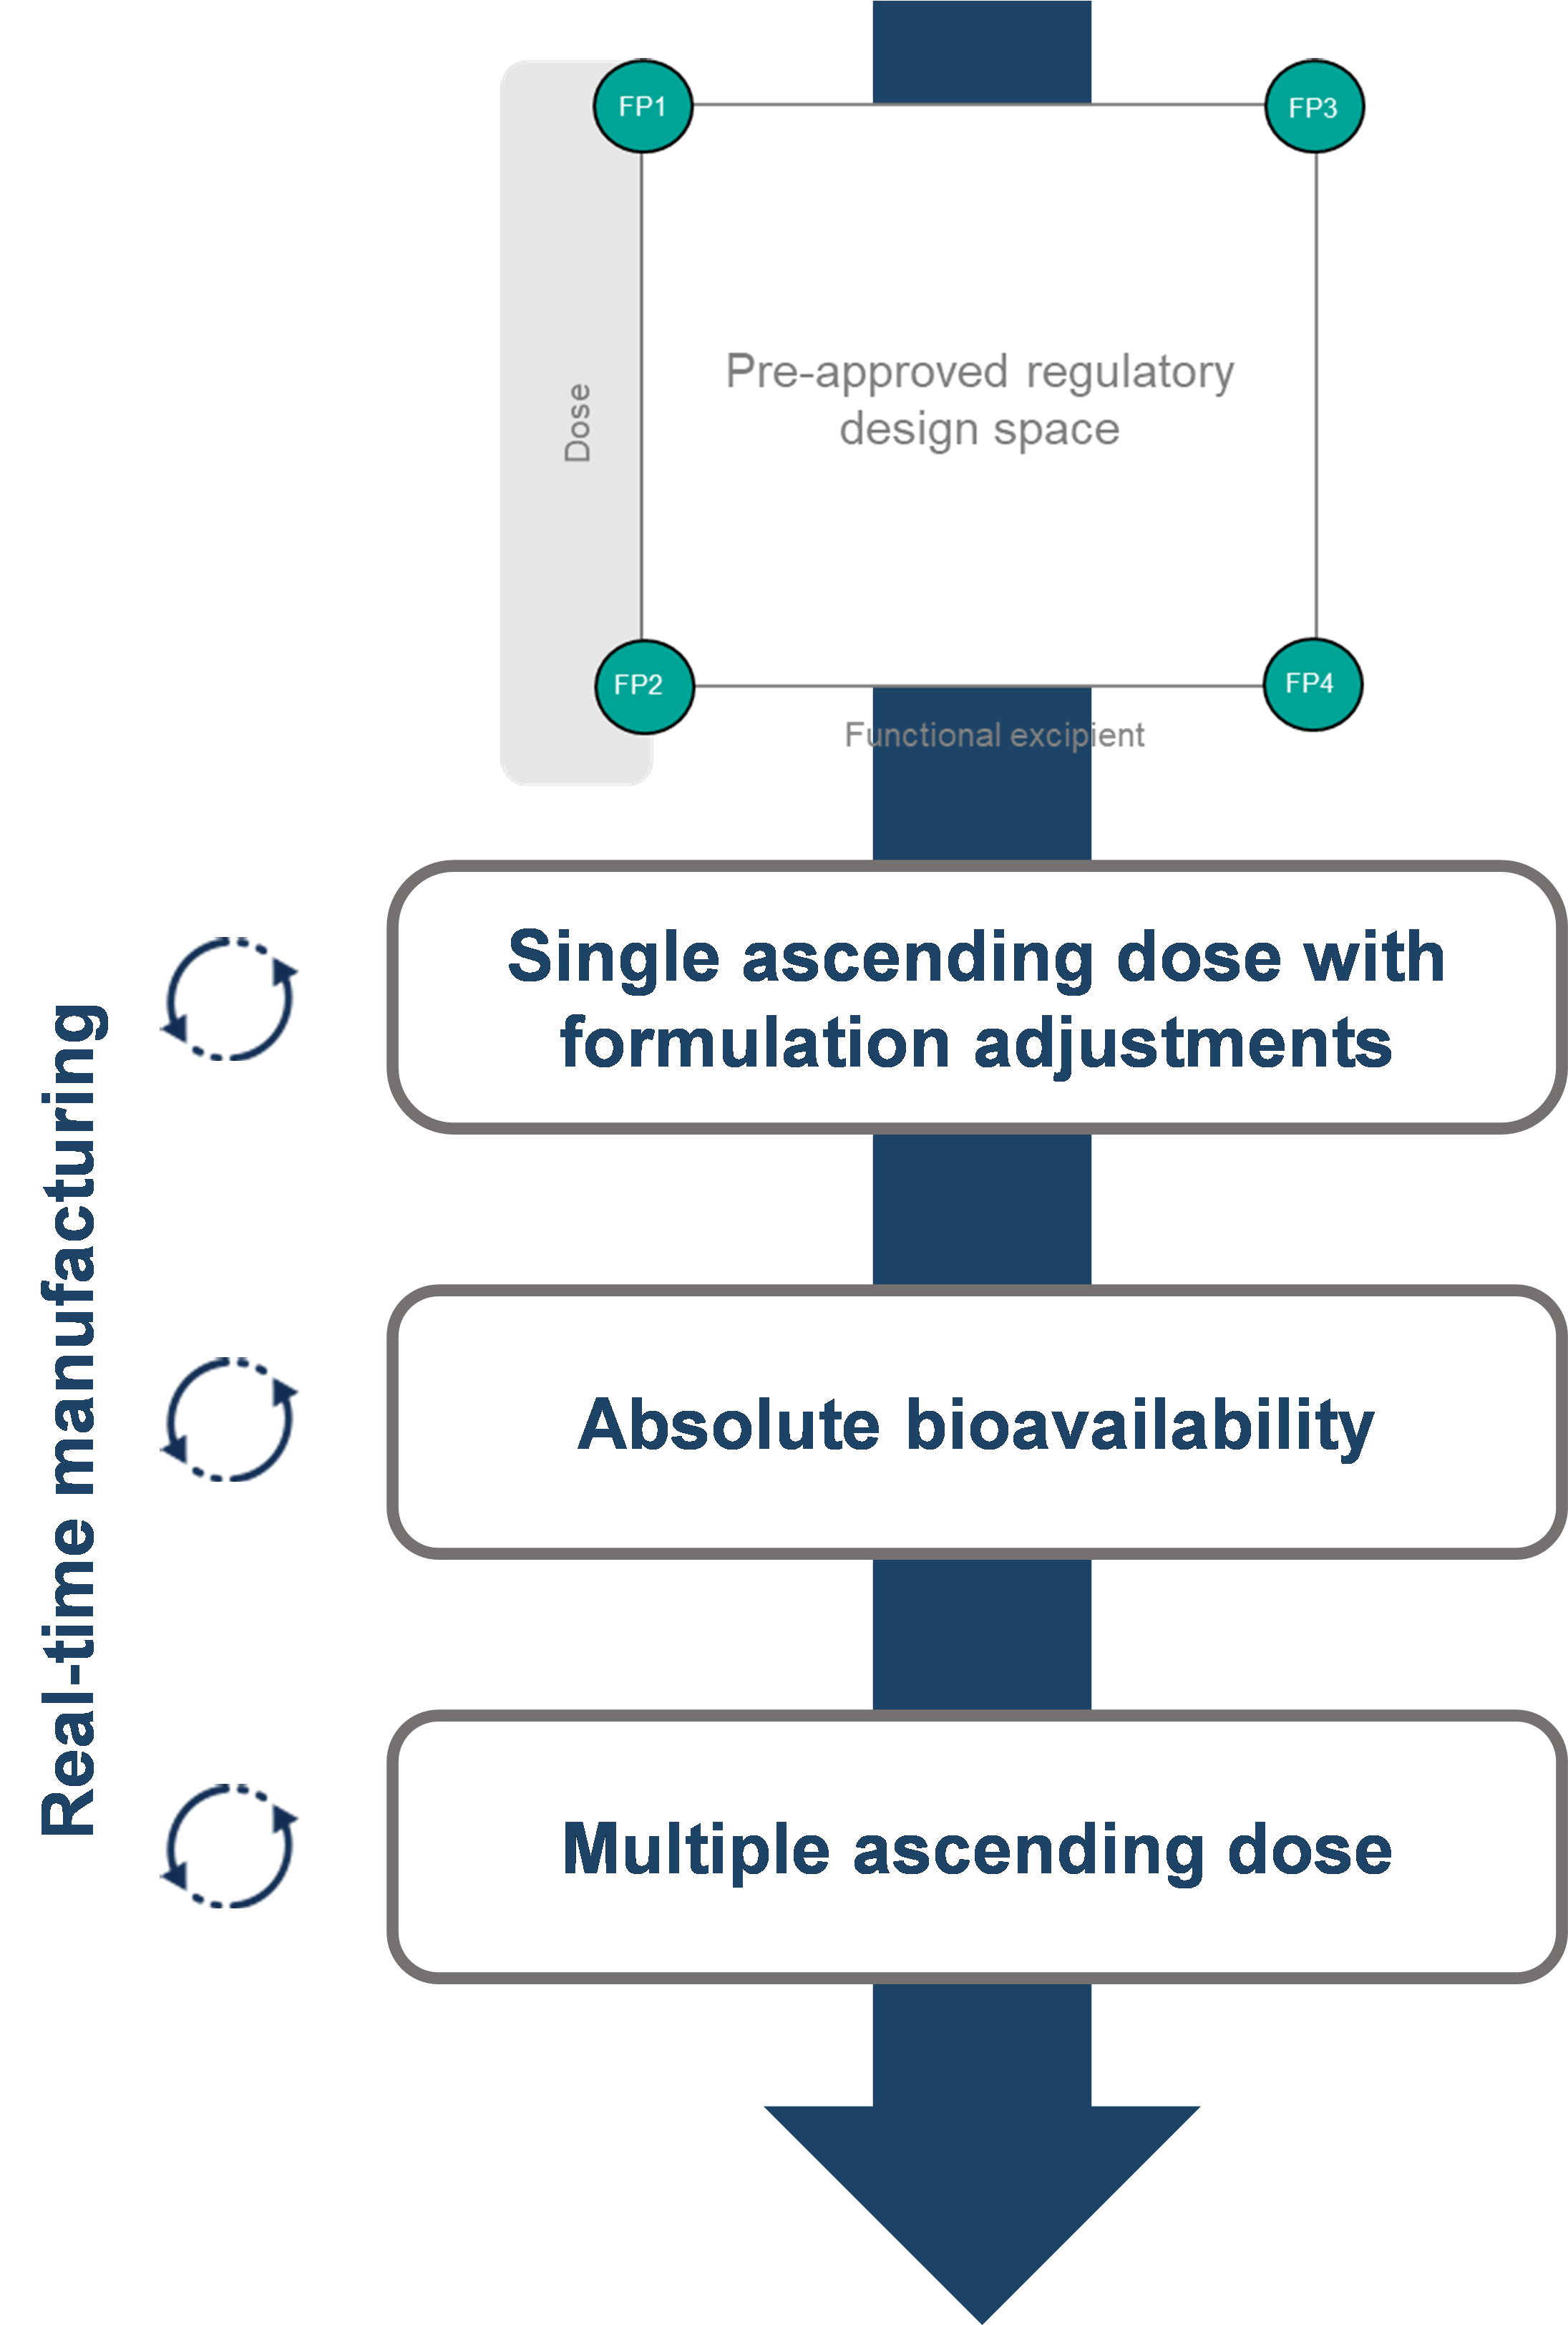 Figure 1: Clinical Trial Design for an Oral Peptide First-in-Human Study